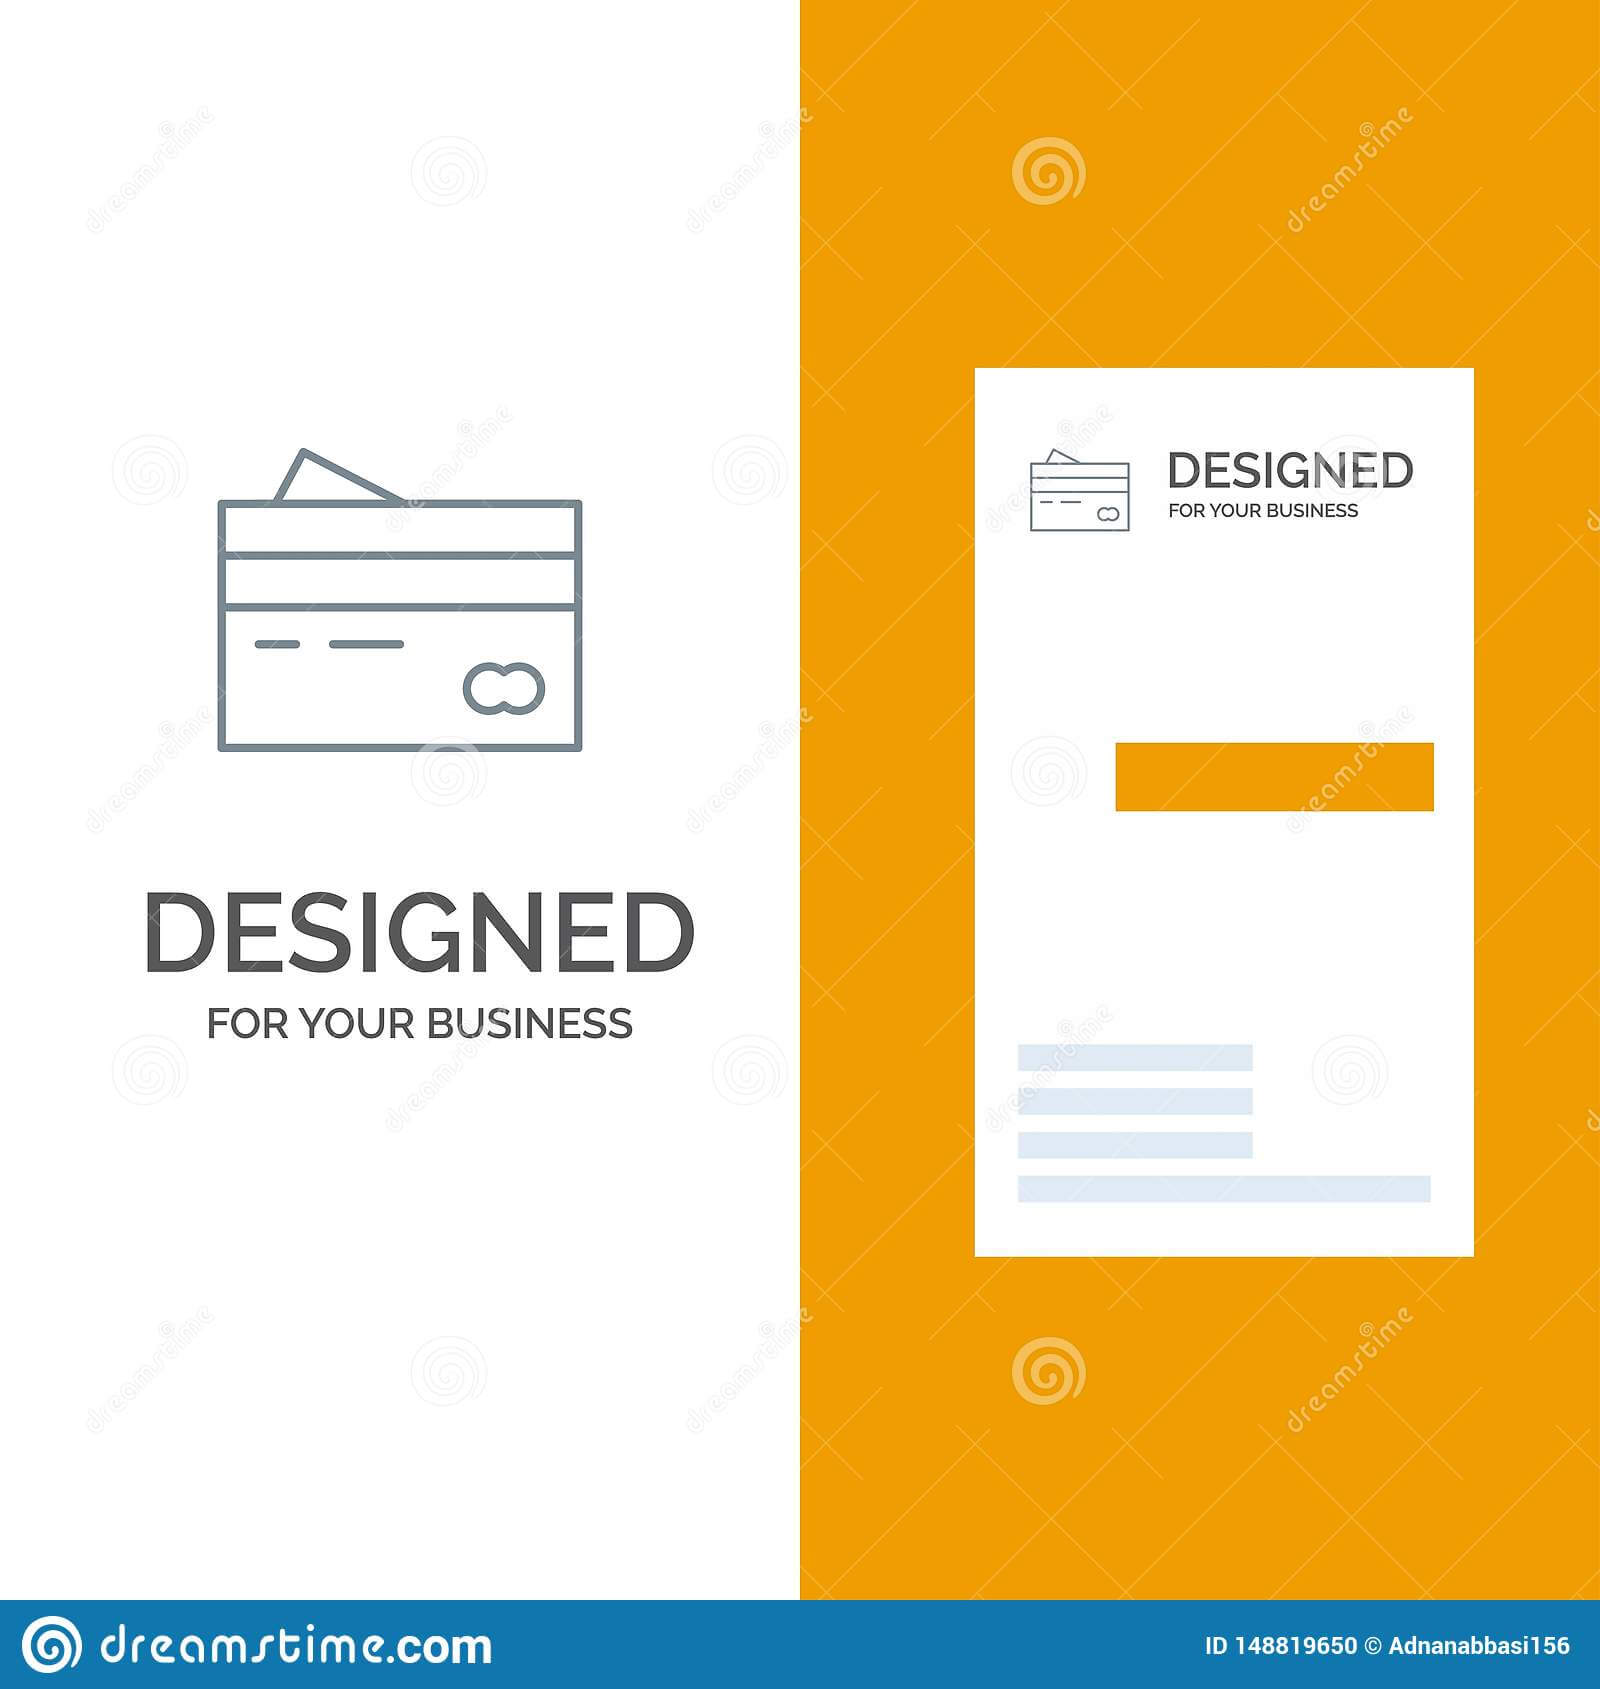 Credit Card, Banking, Card, Cards, Credit, Finance, Money With Credit Card Templates For Sale